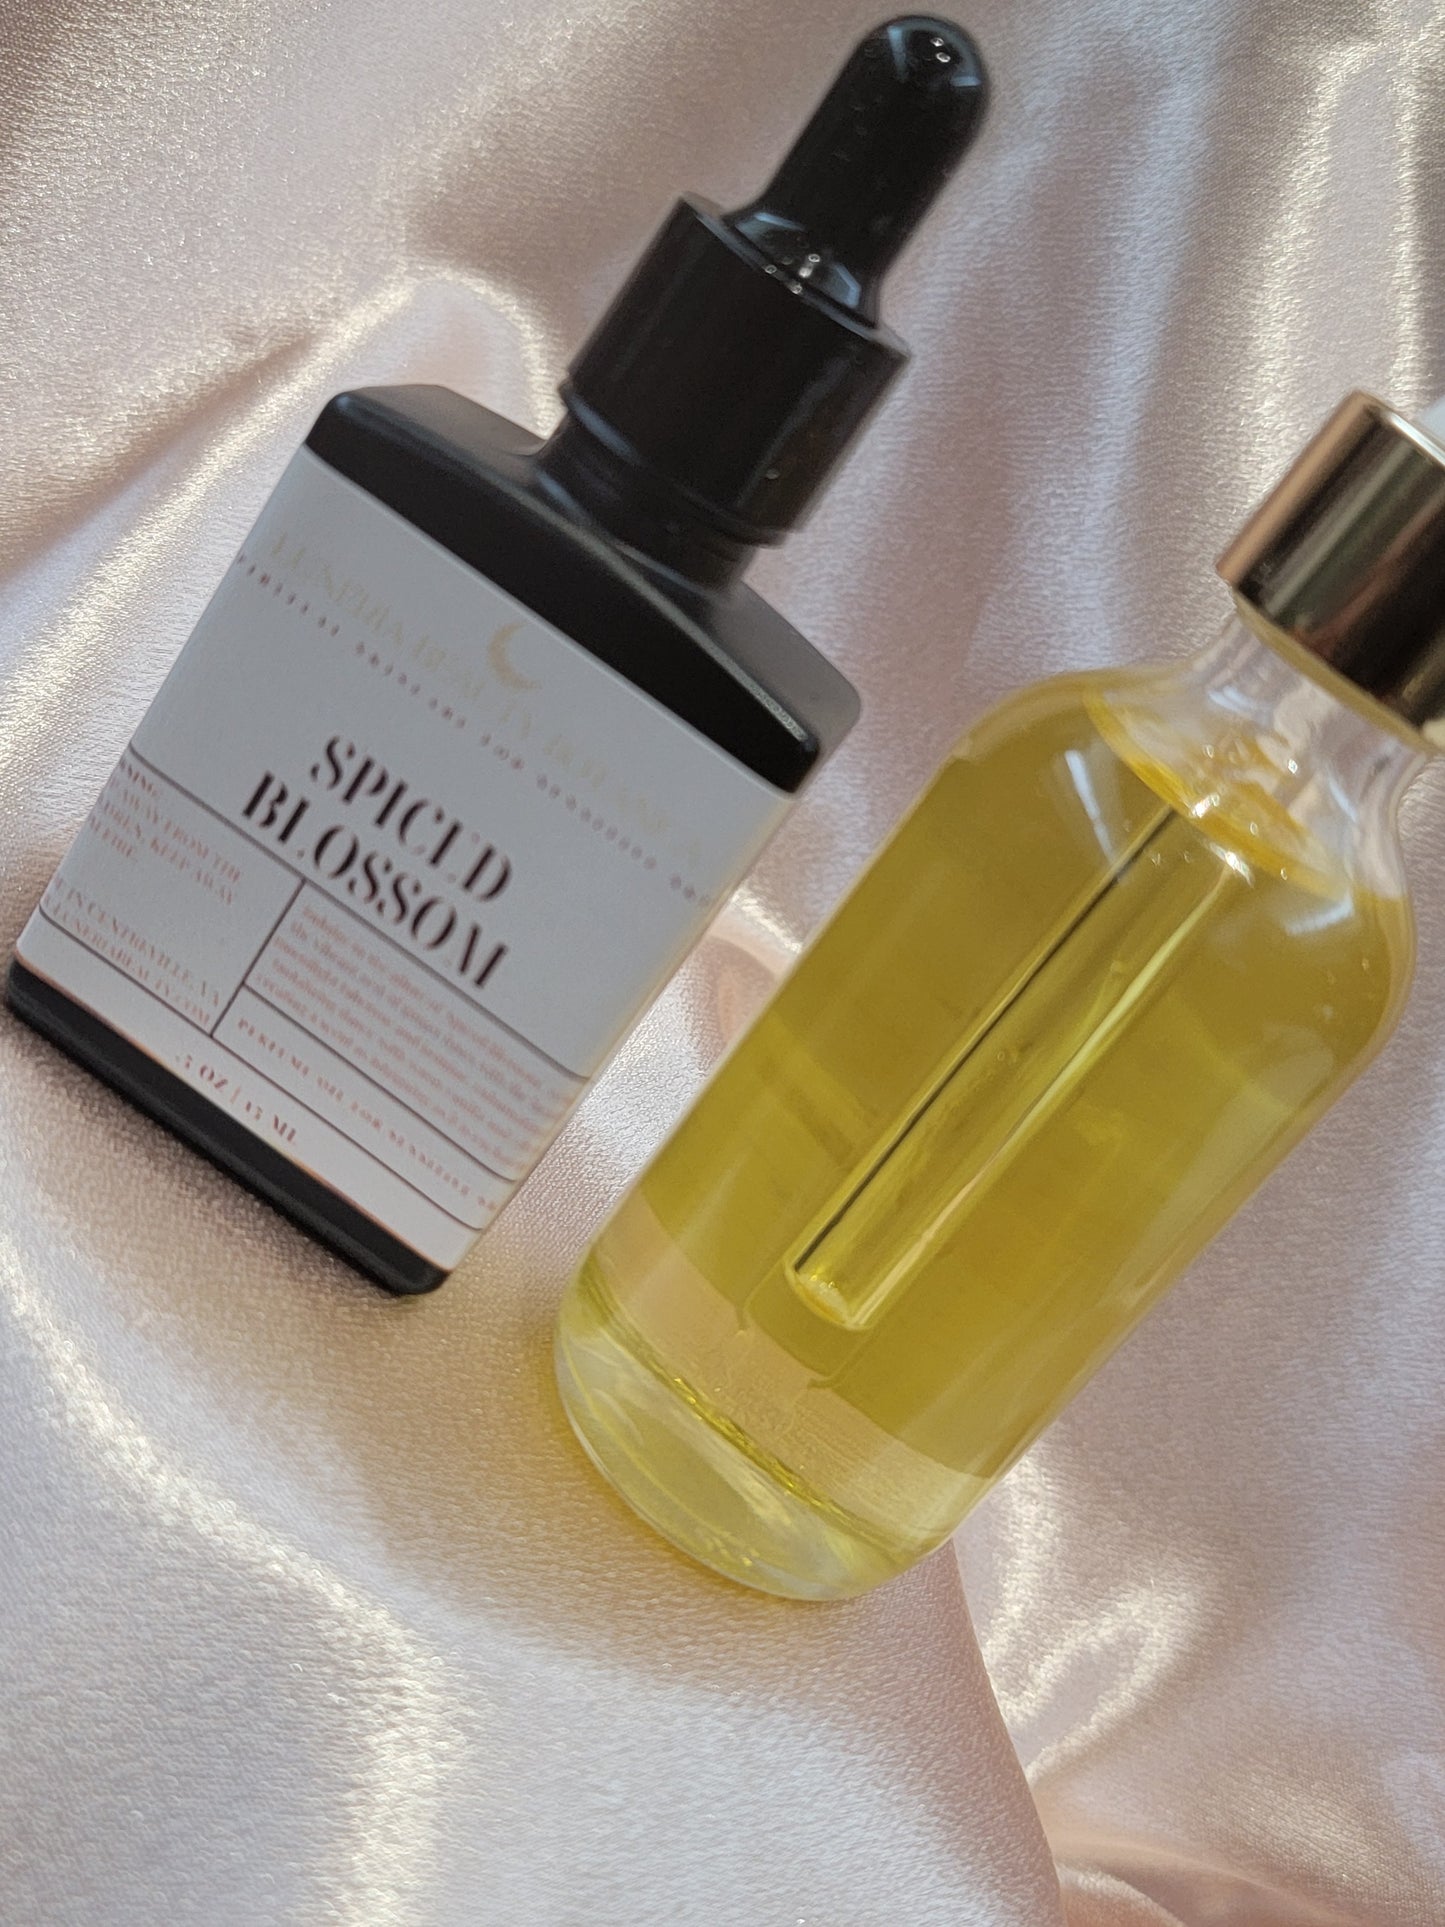 Spiced Blossom: An All- Natural Oil-Based Perfume